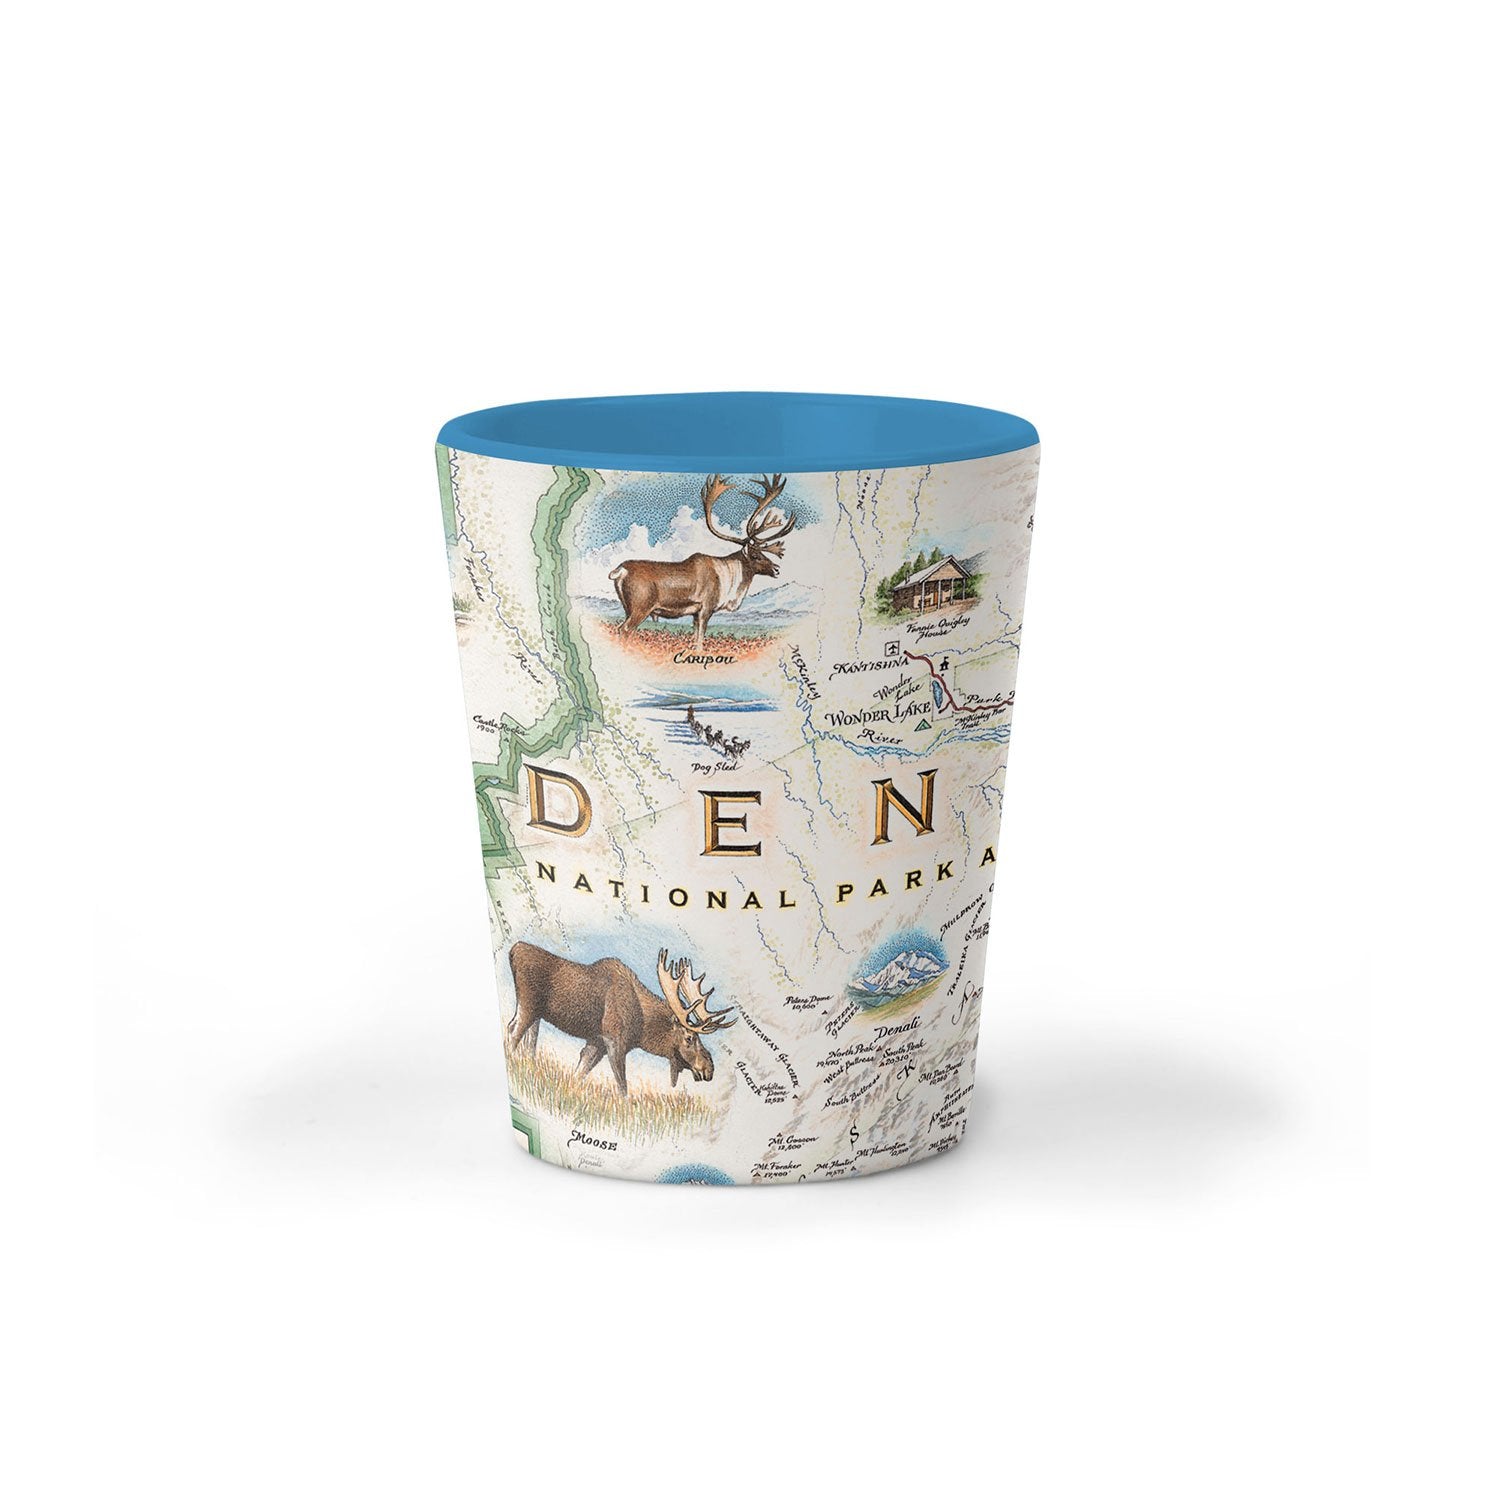 Denali National Park Map Ceramic shot glass by Xplorer Maps. Featuring illustrations of the major flora and fauna found in the park, such as grizzly bears, wolverines, moose, lynx, Dall sheep, and many more. Major attractions are illustrated on the map, like the Talkeetna Visitor Center, Denali Visitor Center, Ruth Glacier, and Kahiltna Glacier.